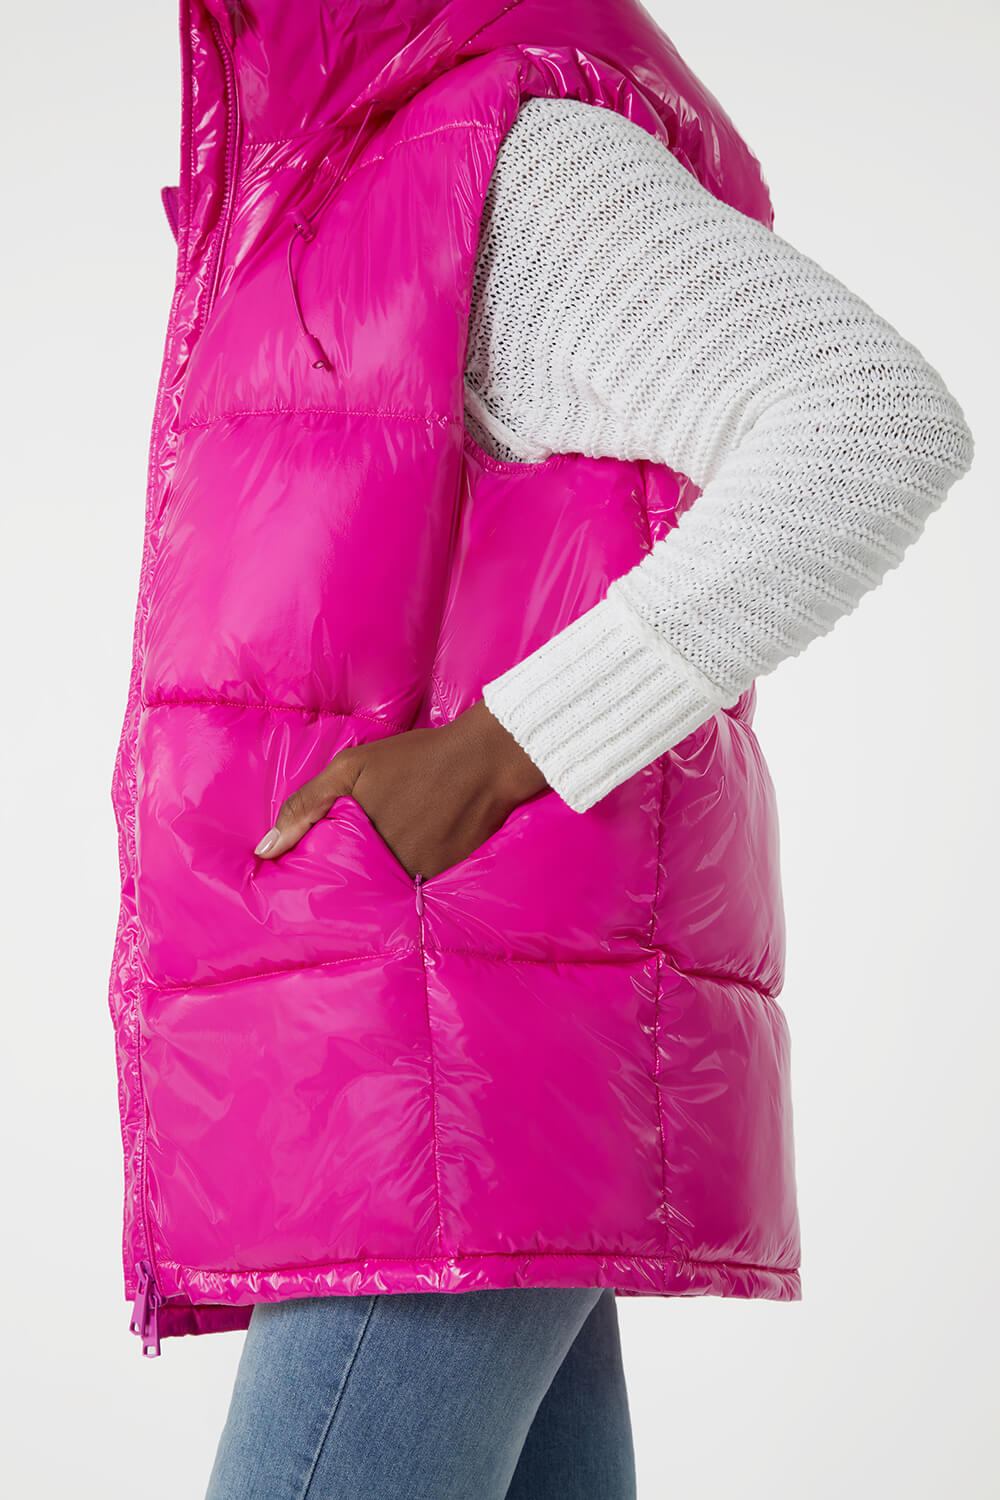 MAGENTA Patent Hooded Gilet, Image 6 of 6